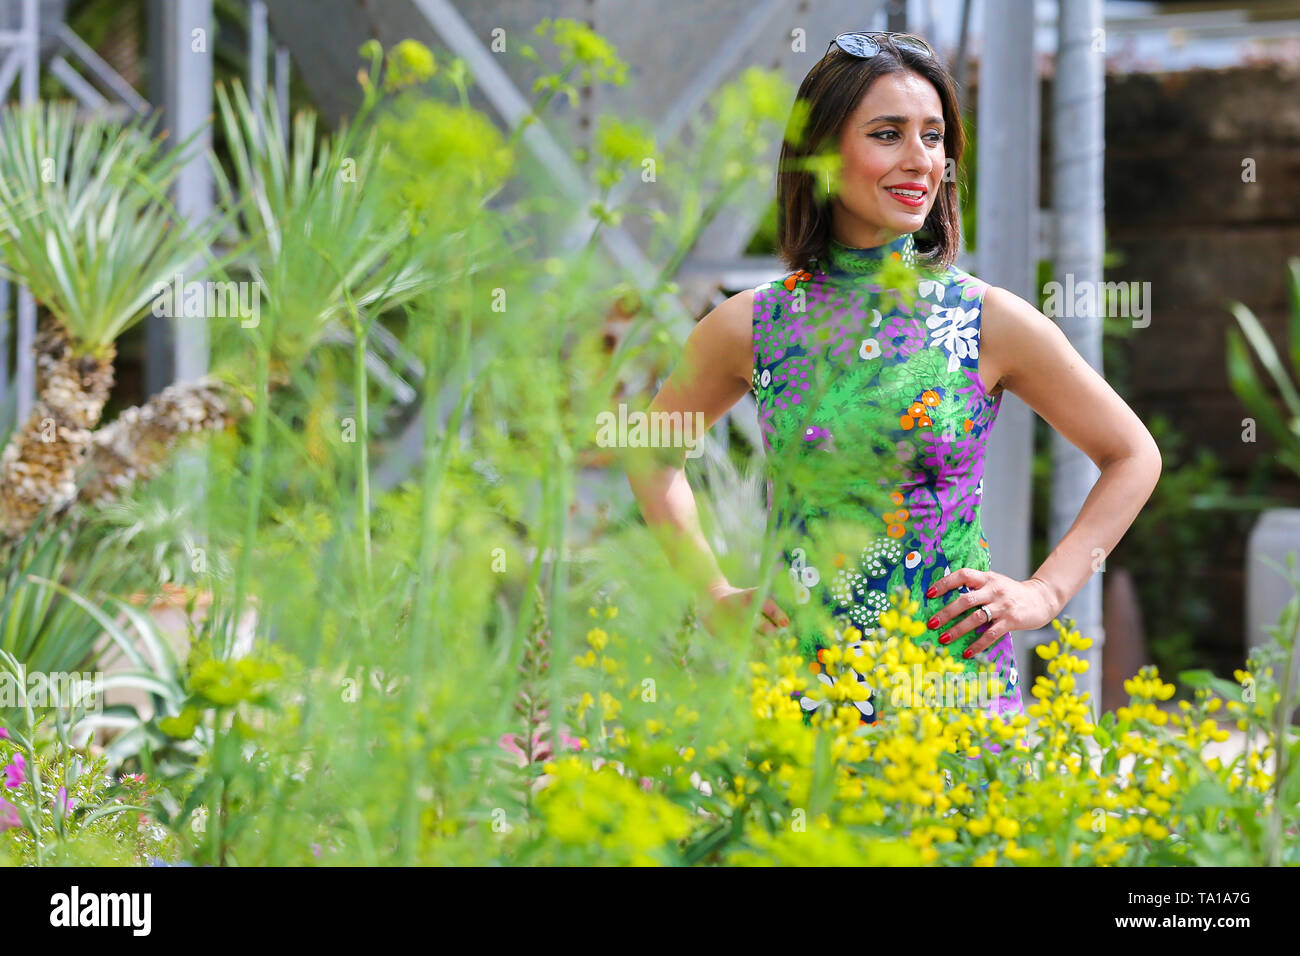 Anita Rani seen during the Chelsea Flower Show. The Royal Horticultural Society Chelsea Flower Show is an annual garden show over five days in the grounds of the Royal Hospital Chelsea in West London. The show is open to the public from 21 May until 25 May 2019. Stock Photo